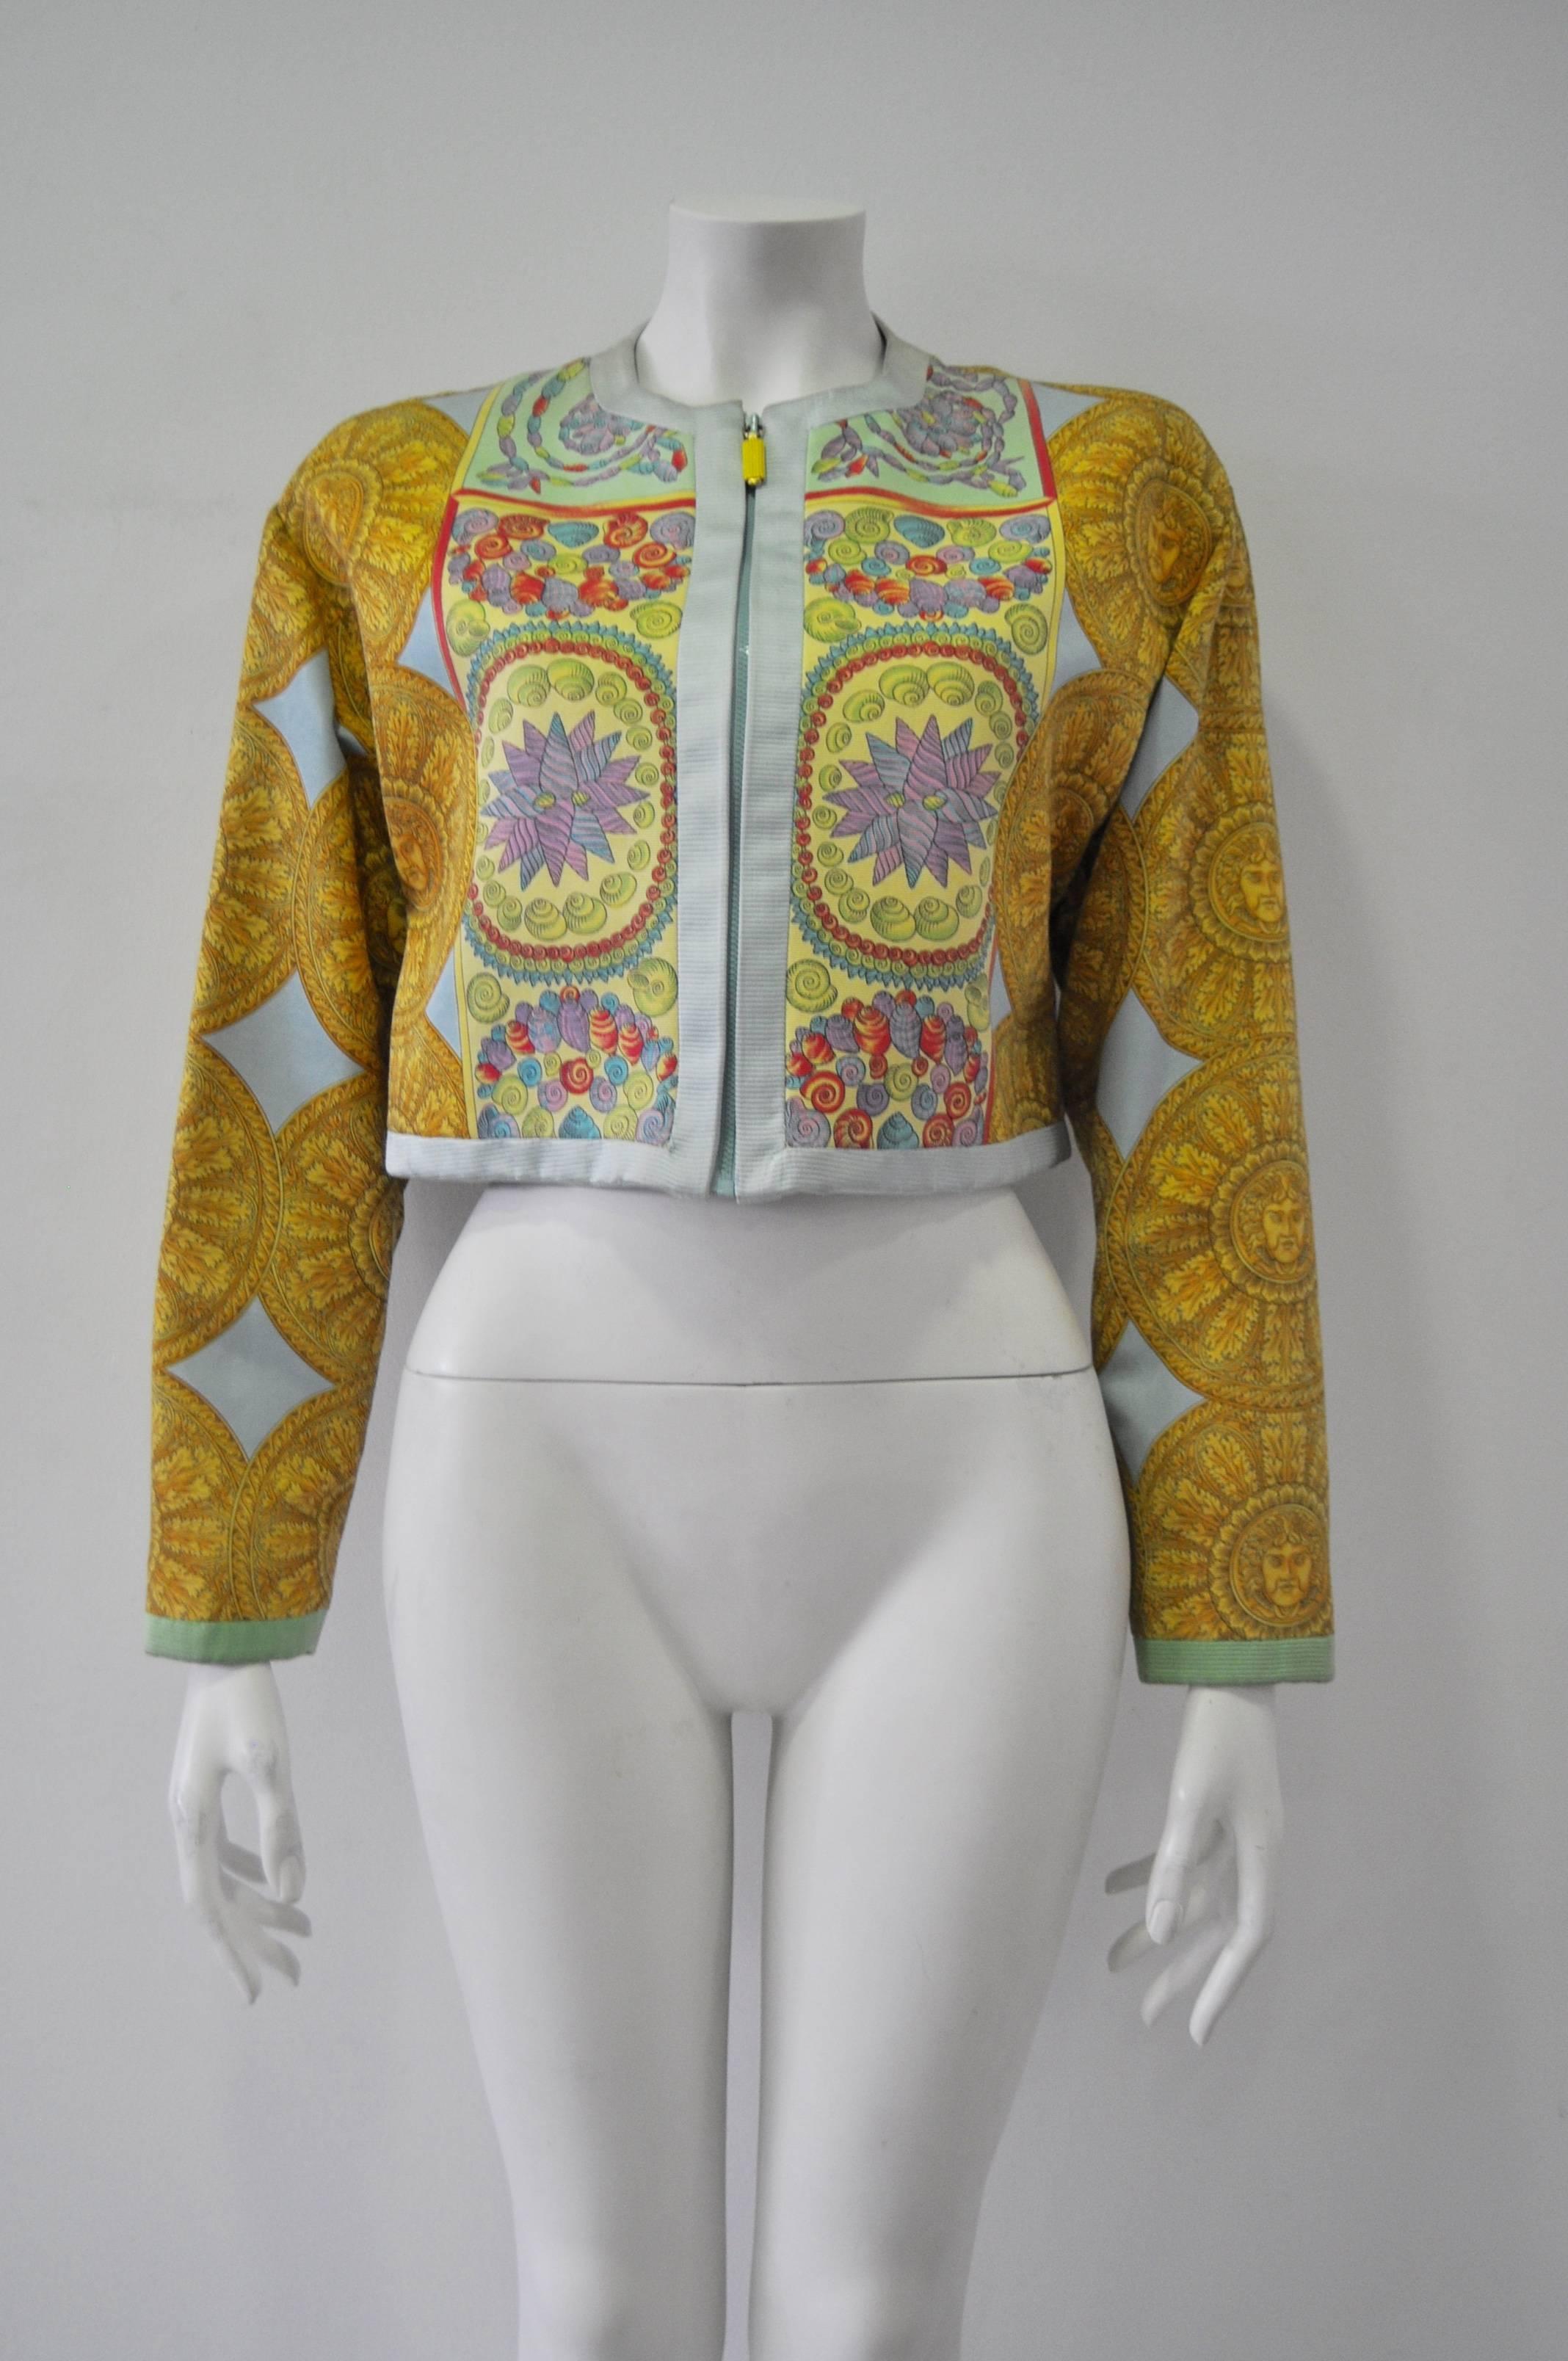 Very Rare and Iconic Gianni Versace Istante Pastel Medusa Shell Print Bolero, Pinnacle Spring 1992 Collection